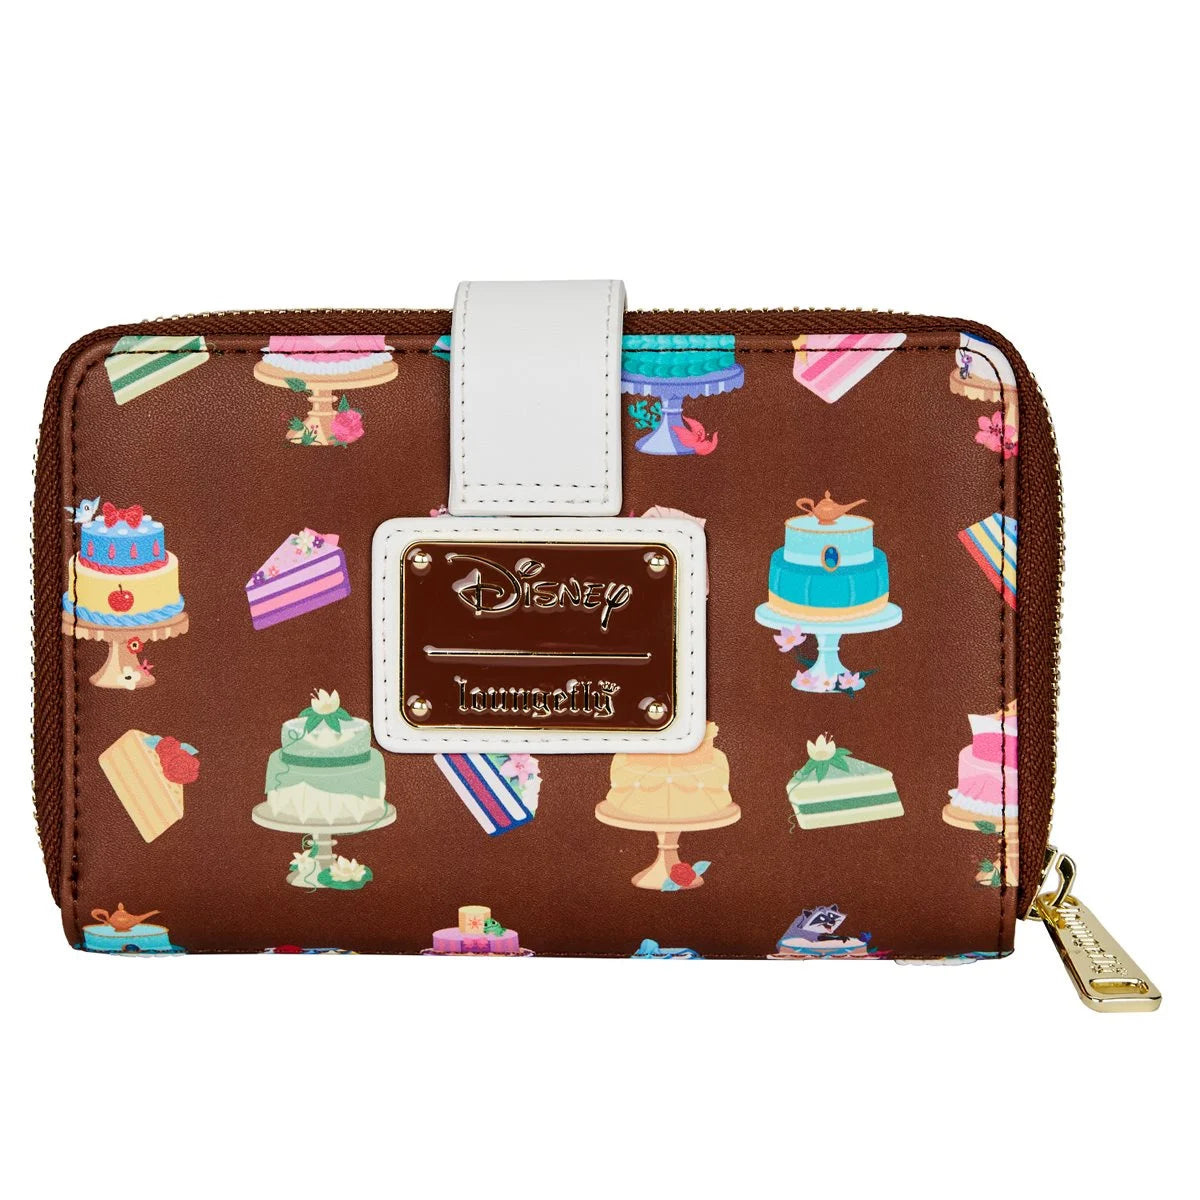 Loungefly Disney Princesses Castles All Over Print Wallet